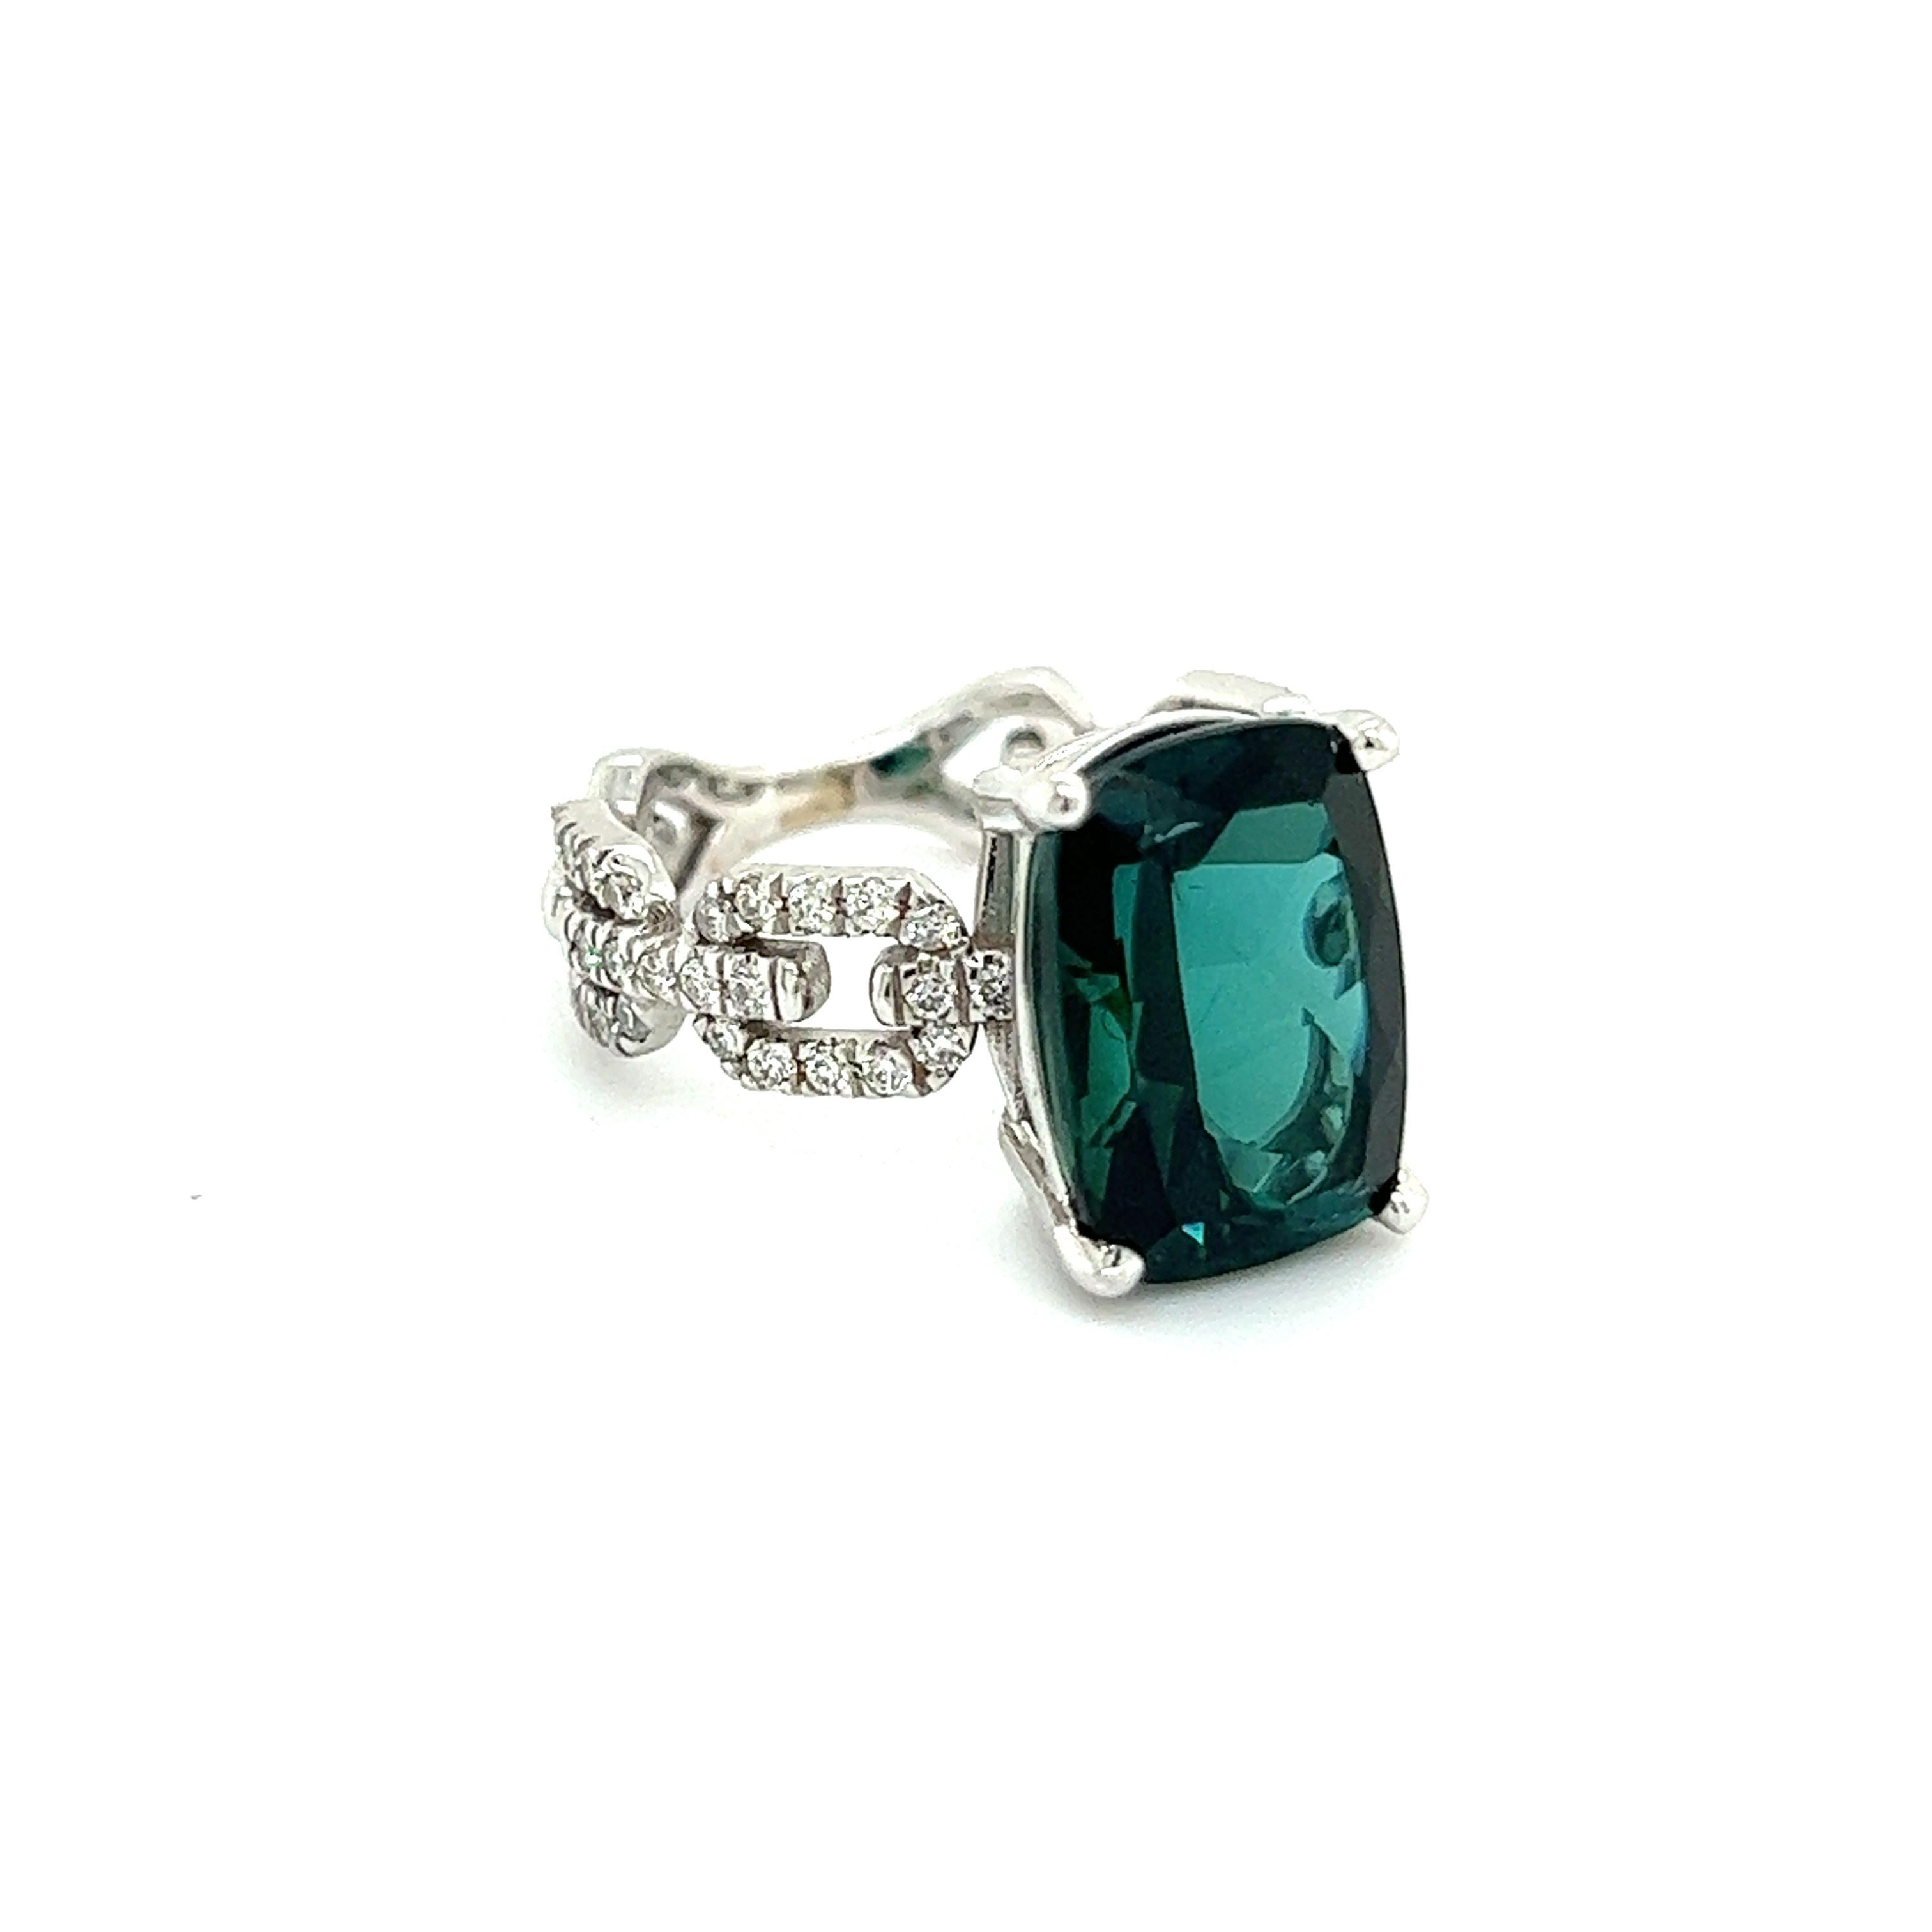 Natural Tourmaline Diamond Ring 6.5 14k White Gold 6.32 TCW Certified For Sale 11